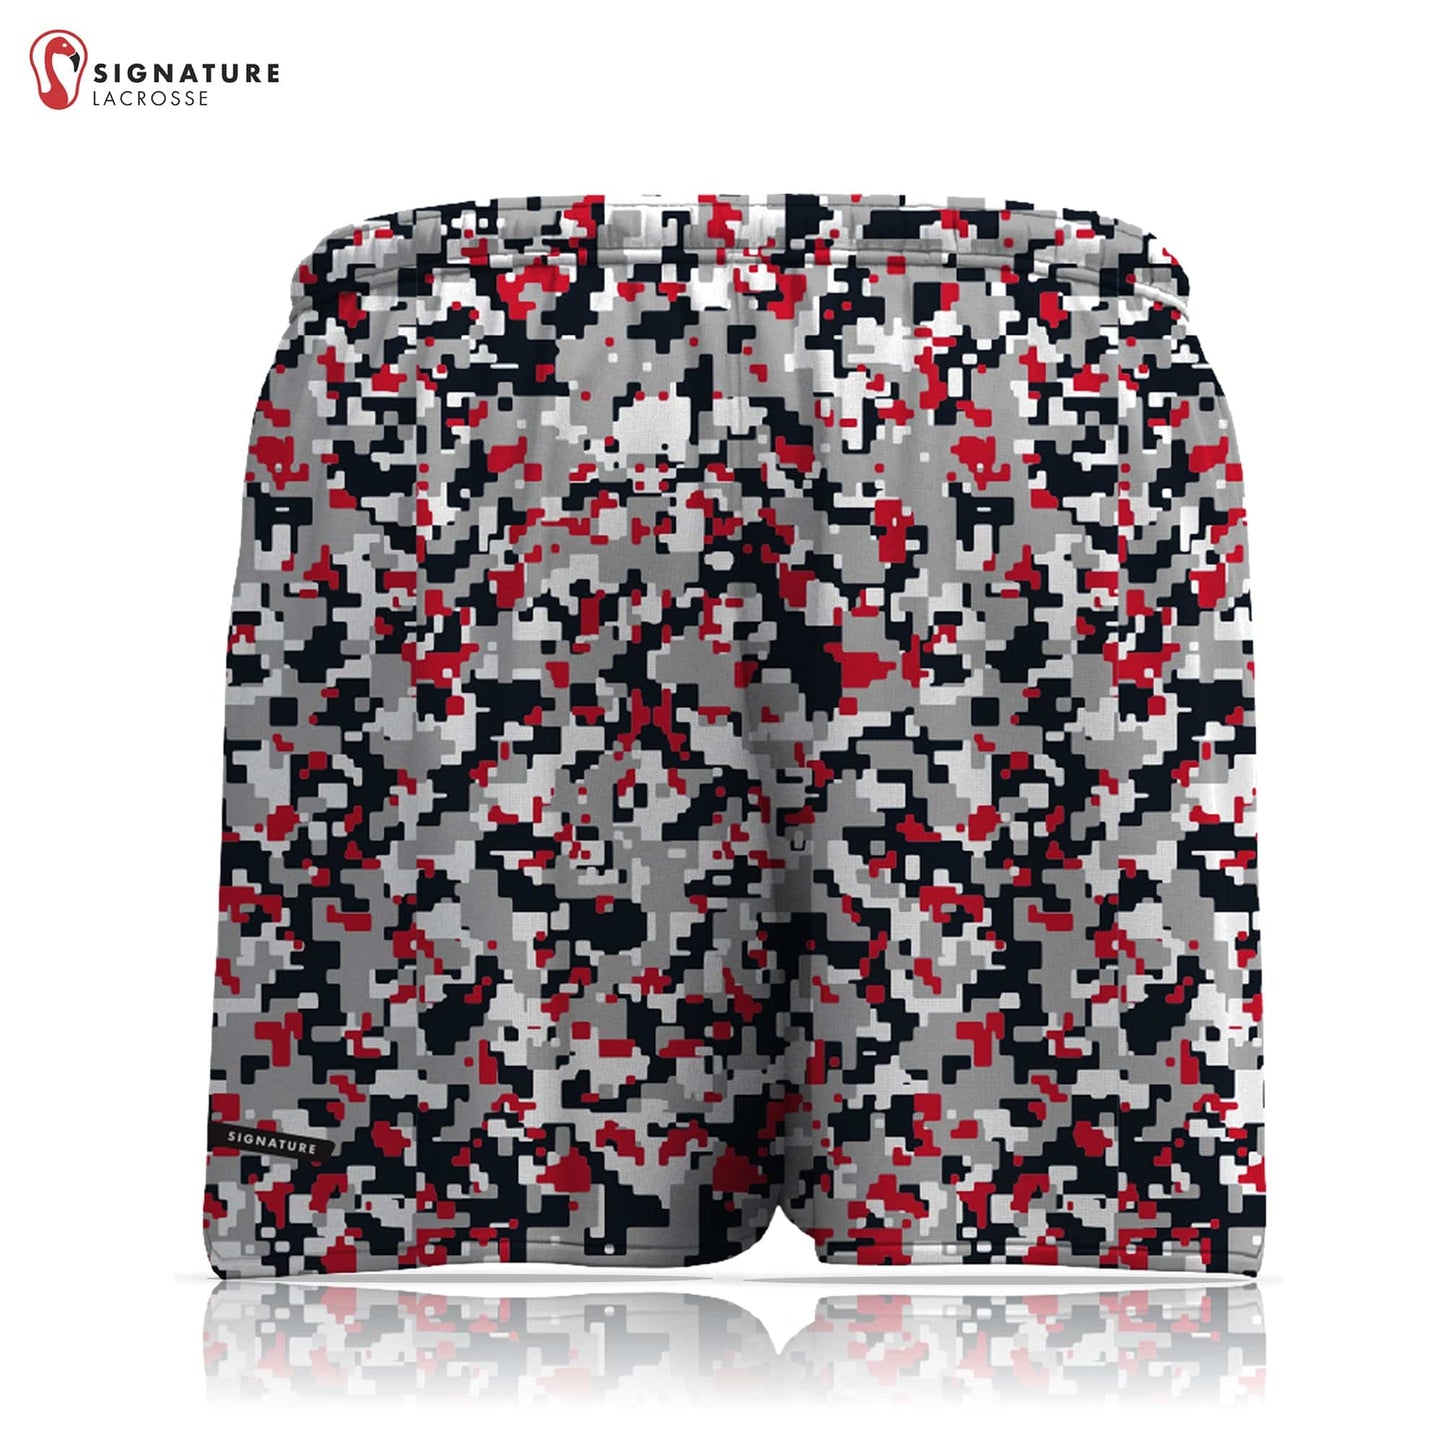 Amesbury Youth Lacrosse Women's Player Game Shorts Signature Lacrosse